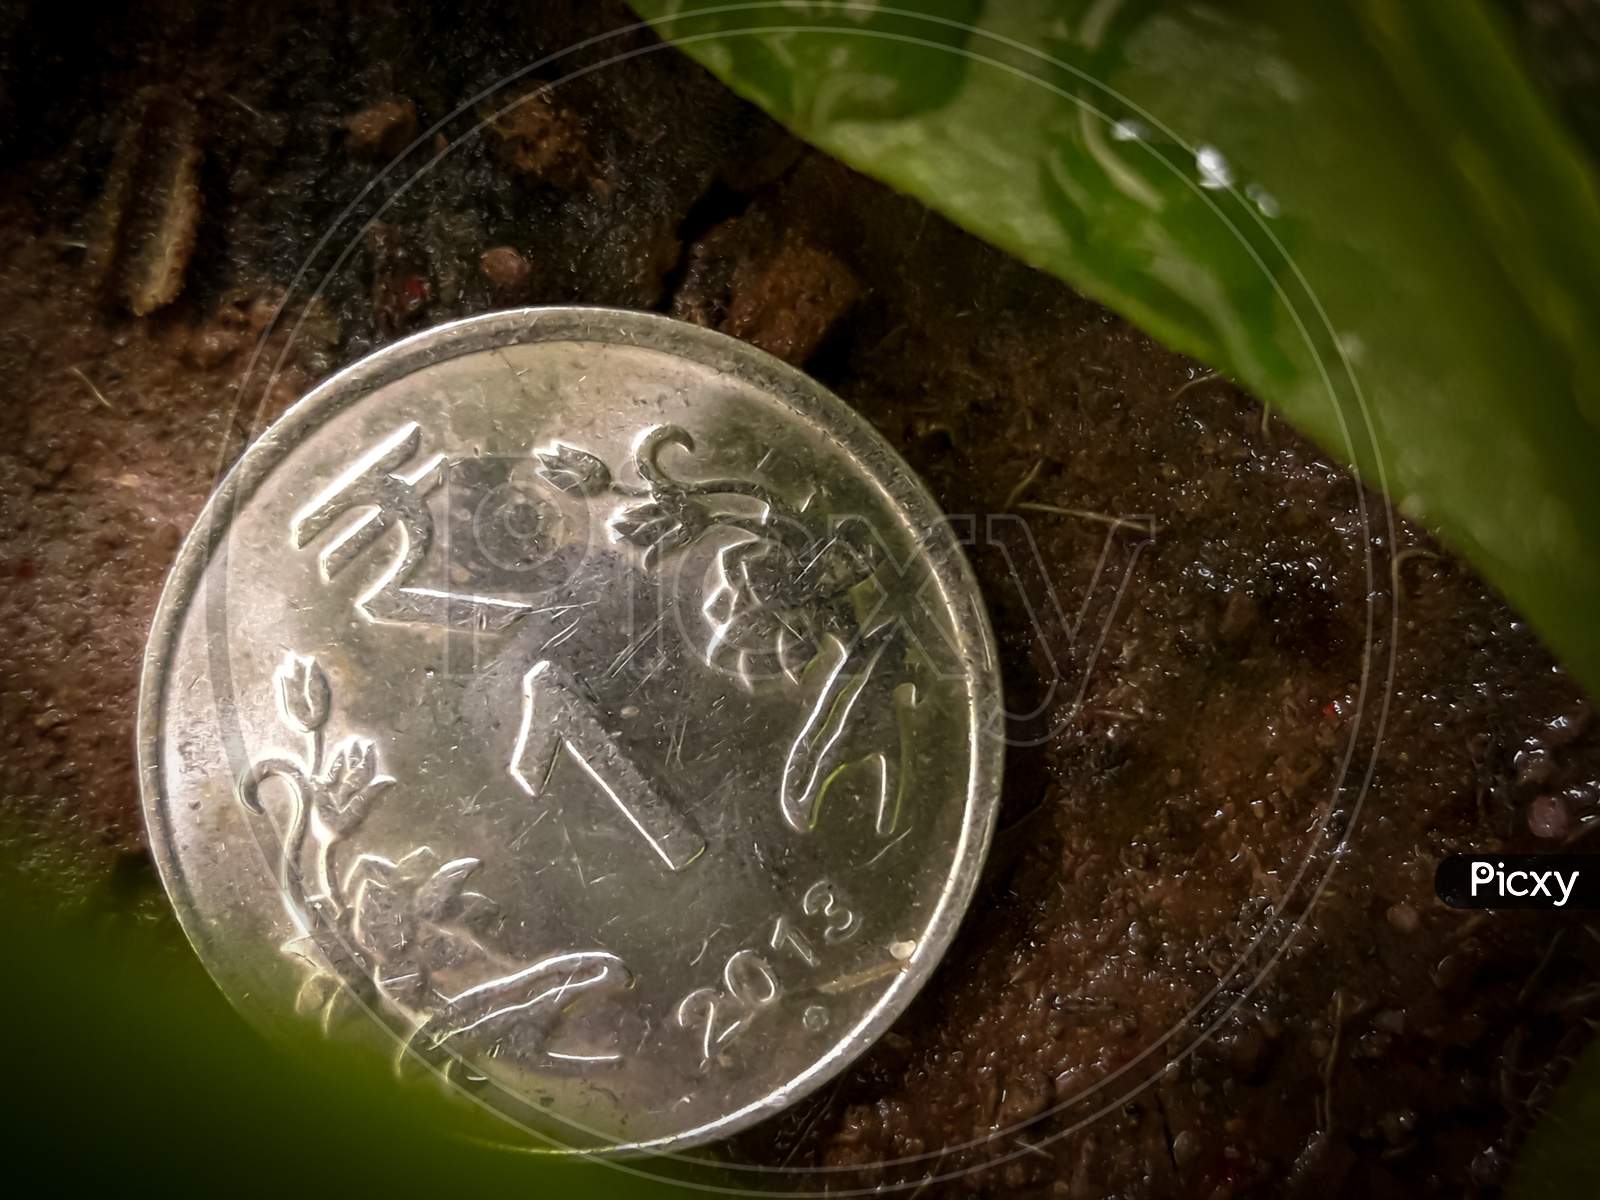 1 Rupee Coin On The Ground With Leaves